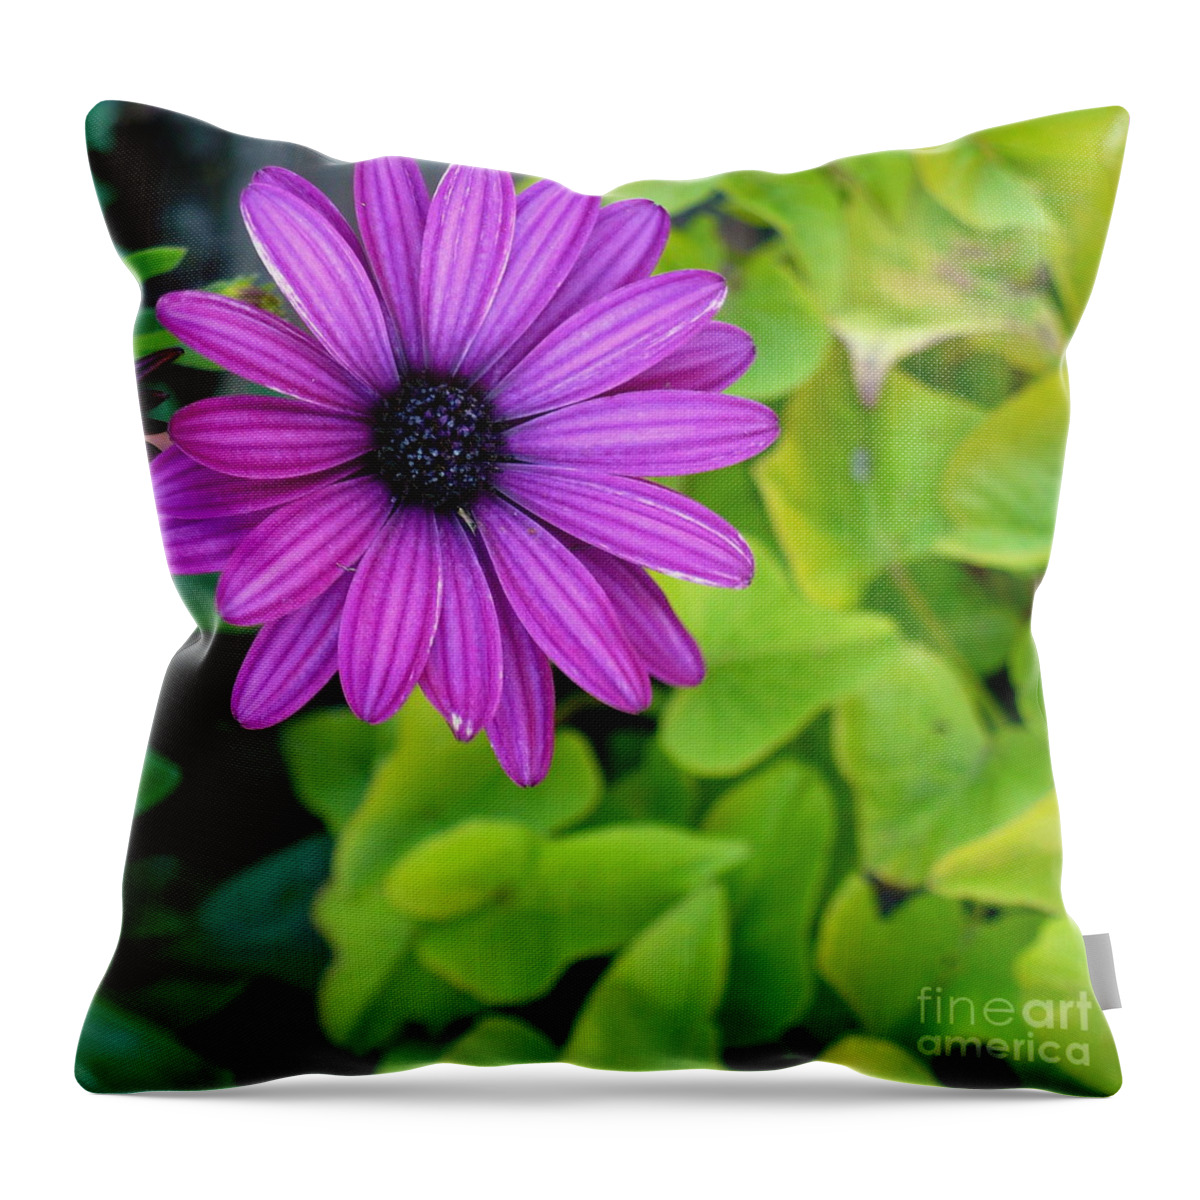 Flower Throw Pillow featuring the photograph Daisy Pop by Linda Bianic